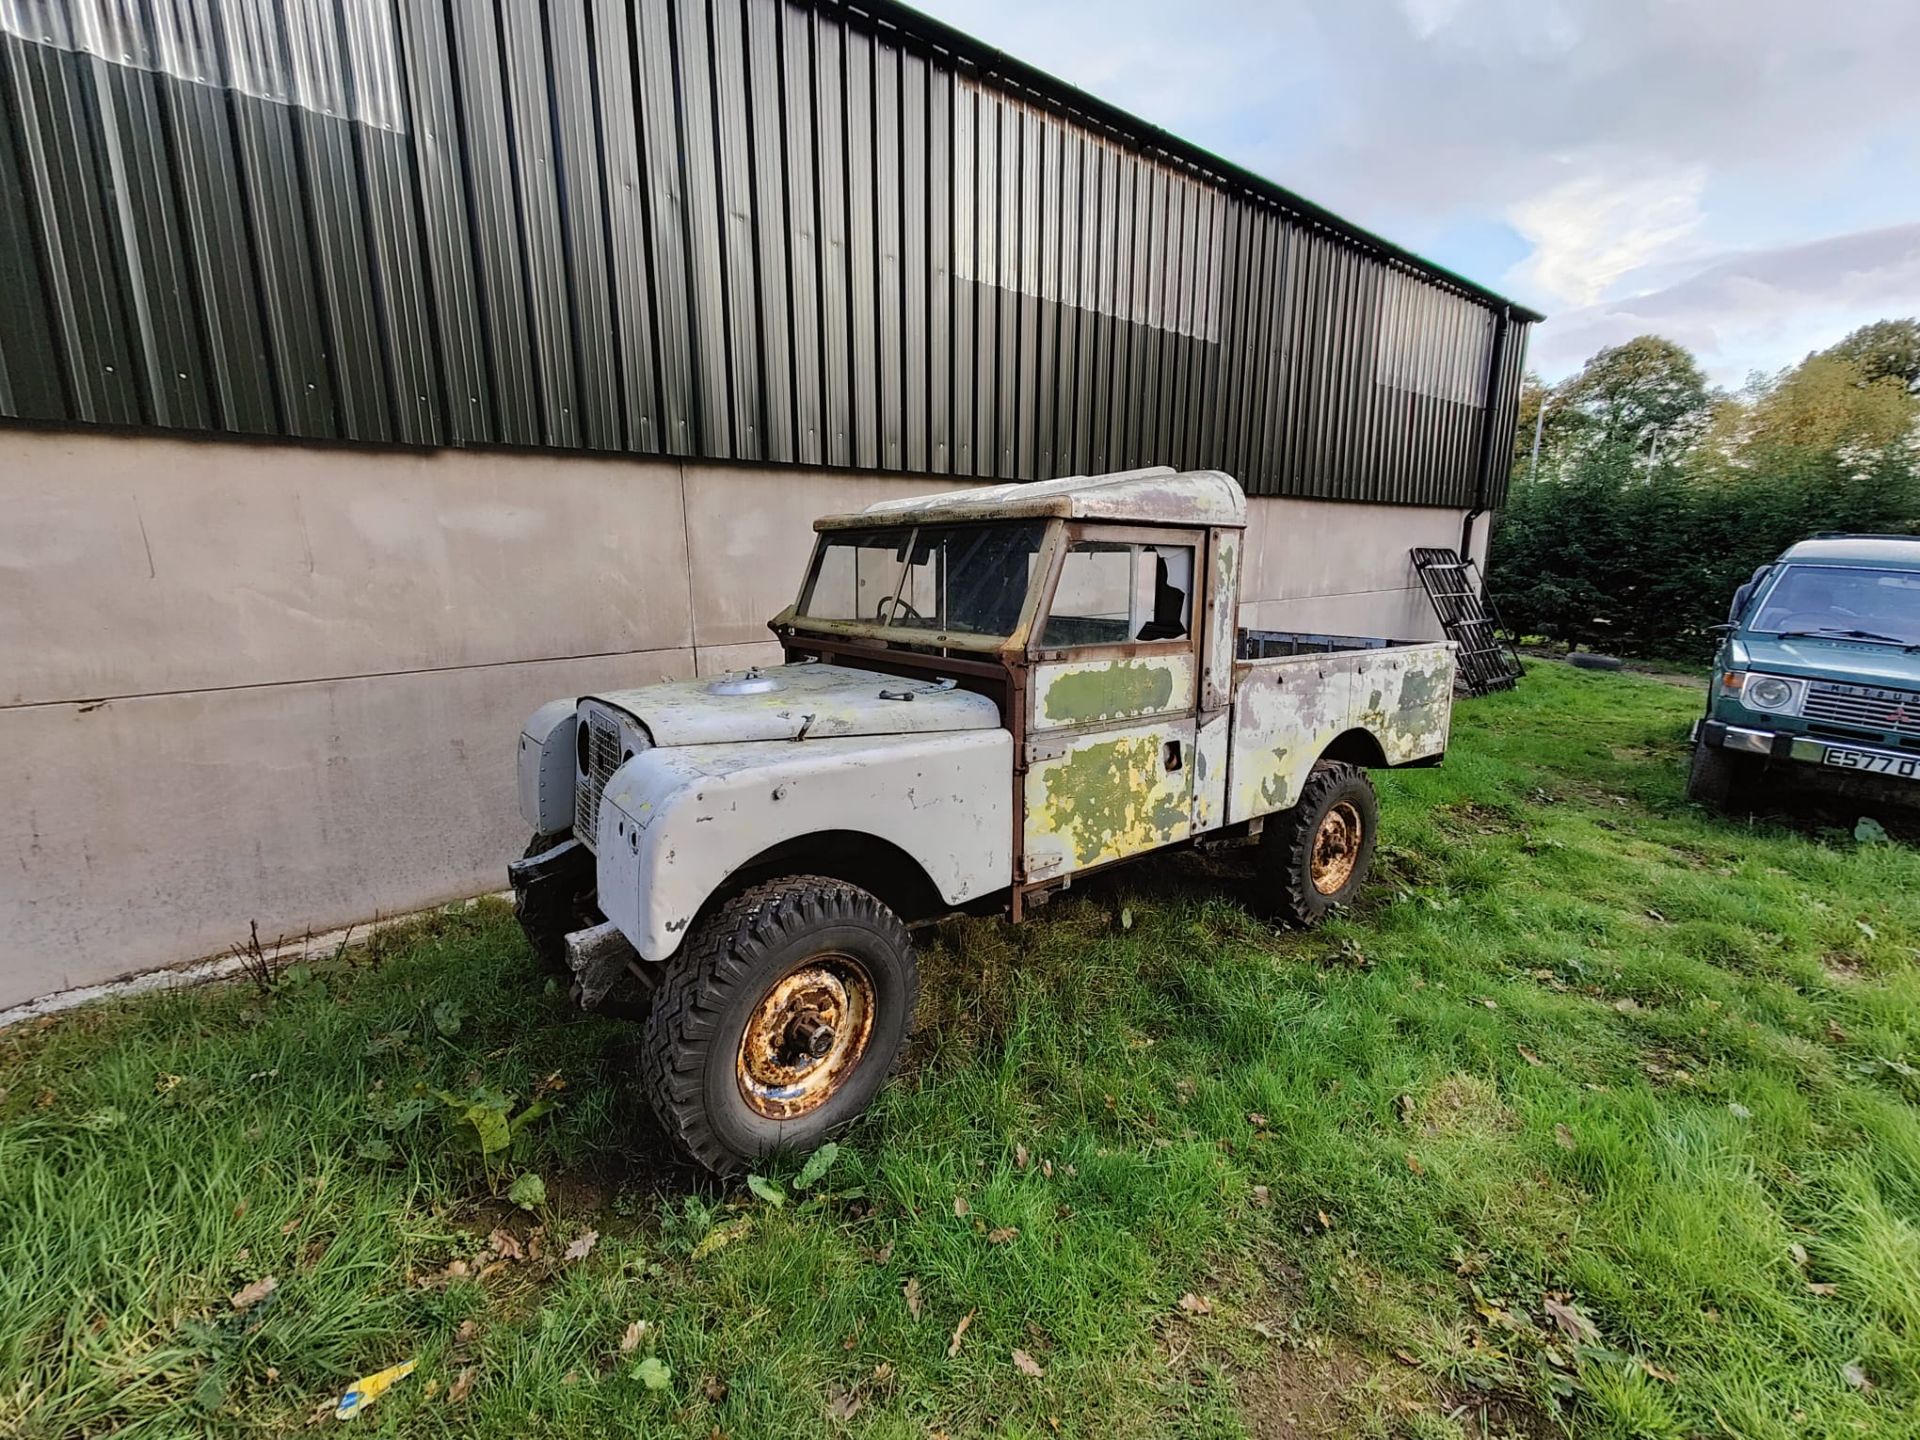 Land Rover 109 Series 1 Galvanised Chassis 107 body, 2 1/4 petrol engine new distributor & leads